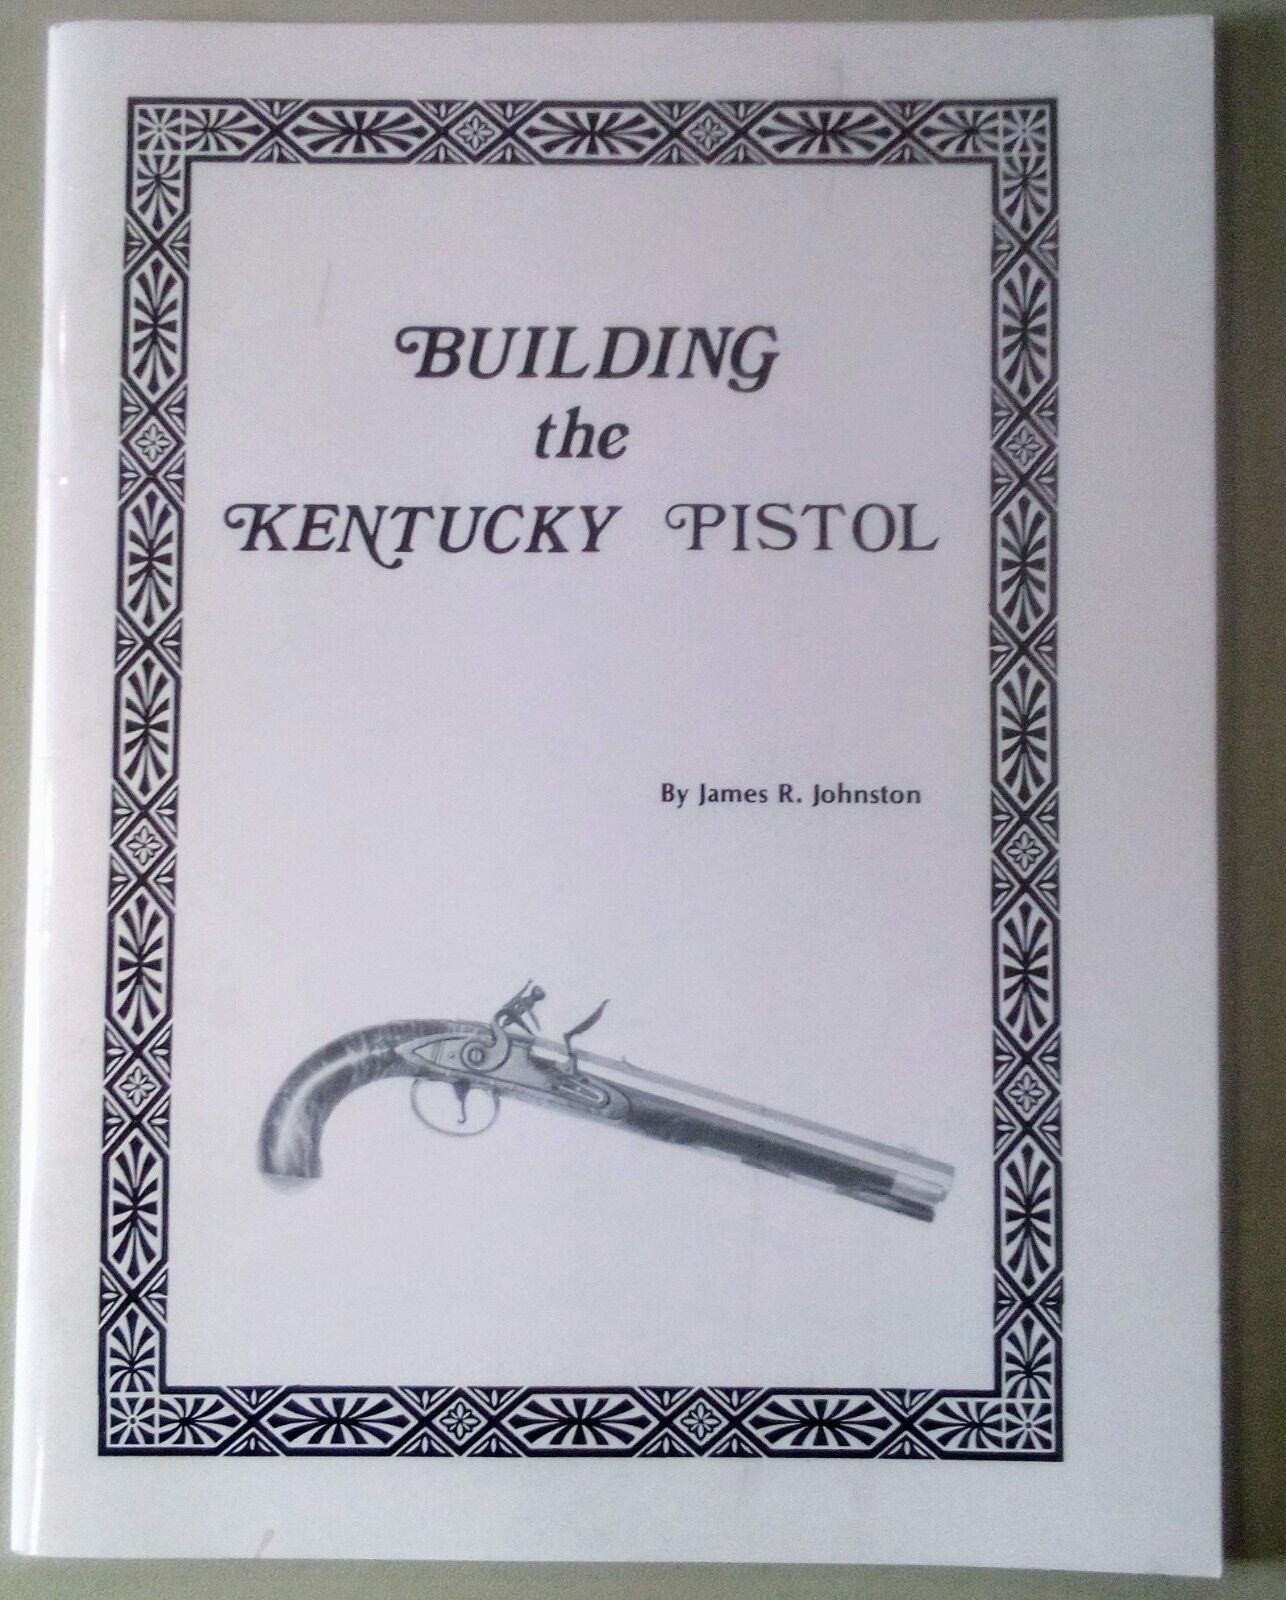 Building the Kentucky Pistol by James Johnston Paperback Booklet 1974